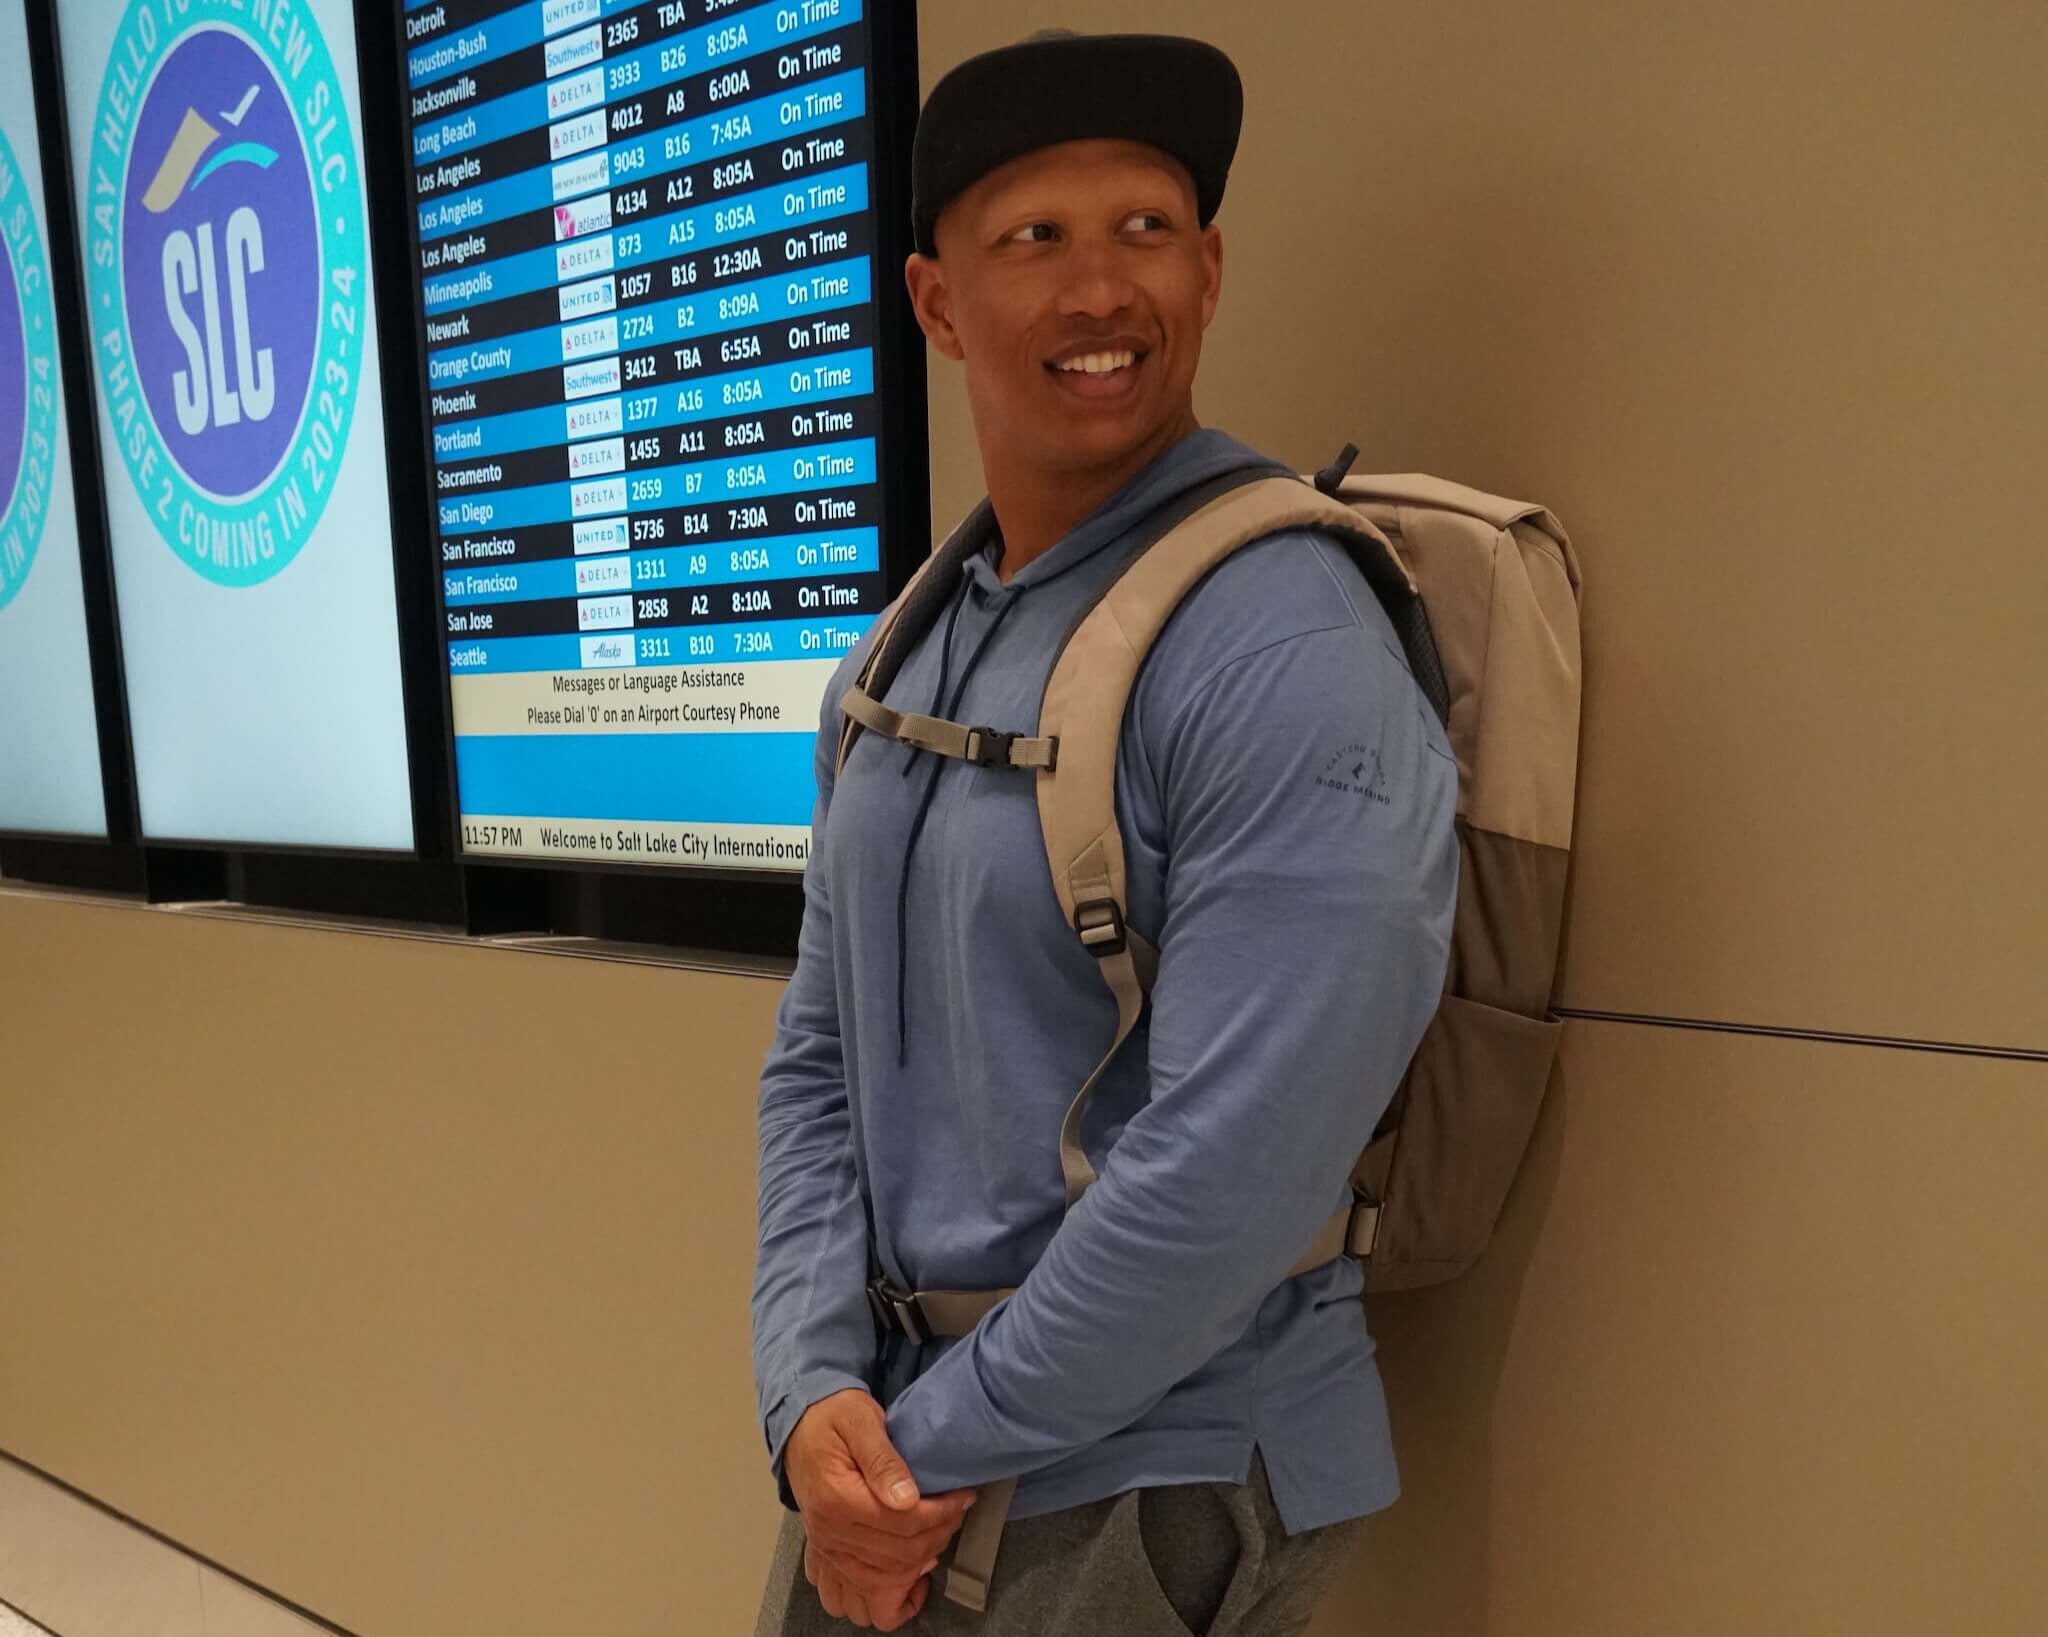 World traveler Khai Johannes knows exactly what to wear traveling - he's wearing the Solstice Hoodie in front of a flight departures board at an airport